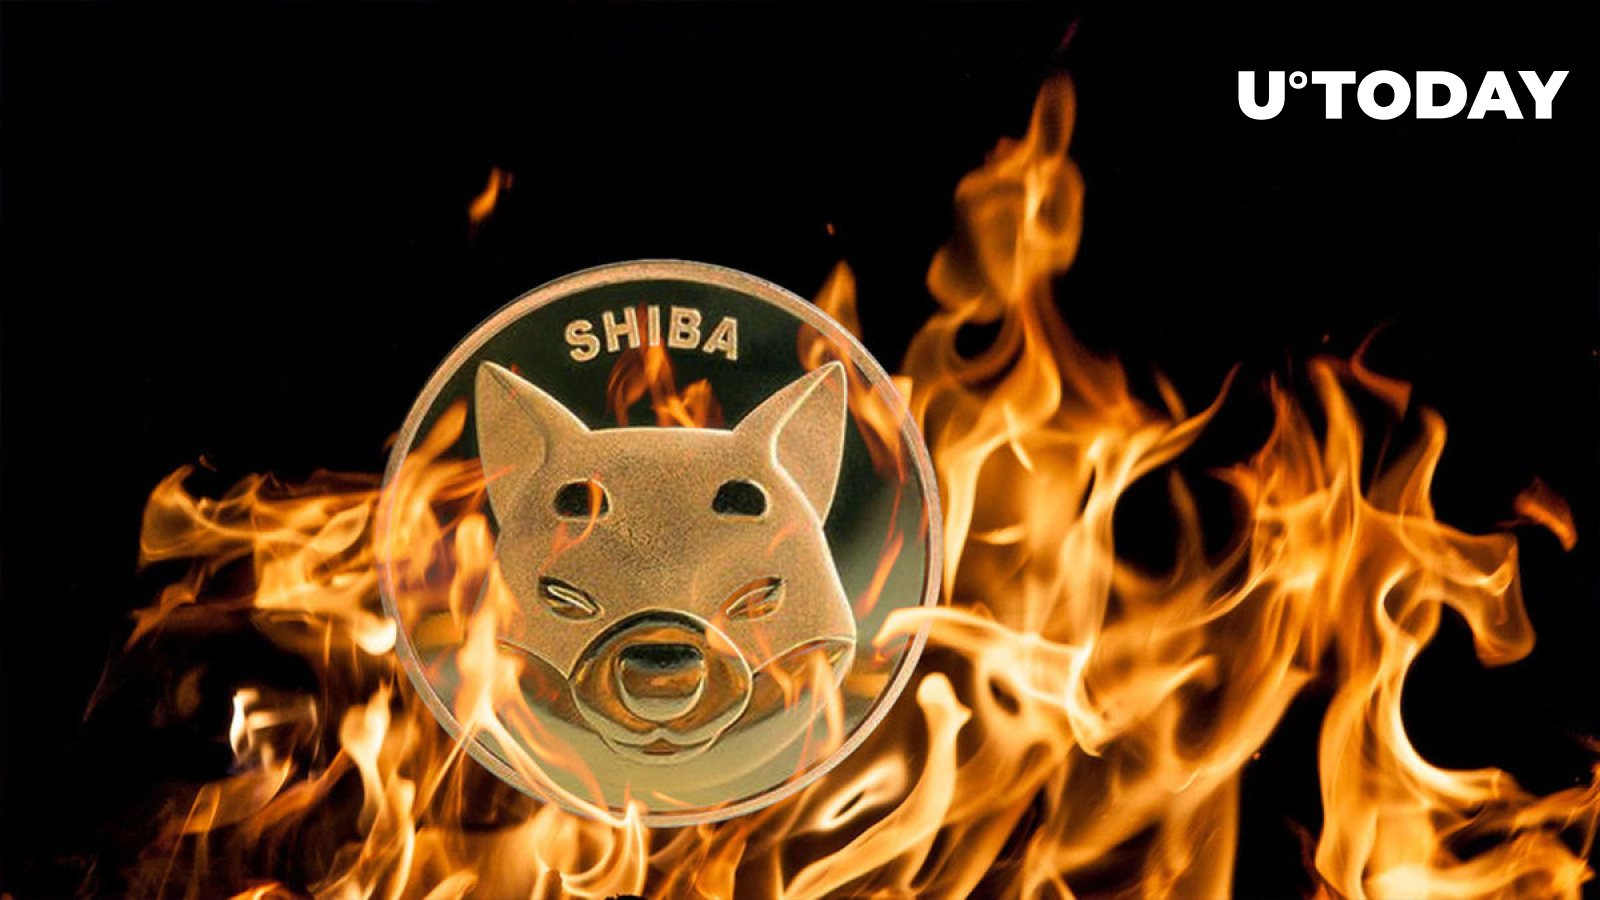 Shiba Inu (SHIB) Burn Rate Up 840%, Here's What This Means for Price